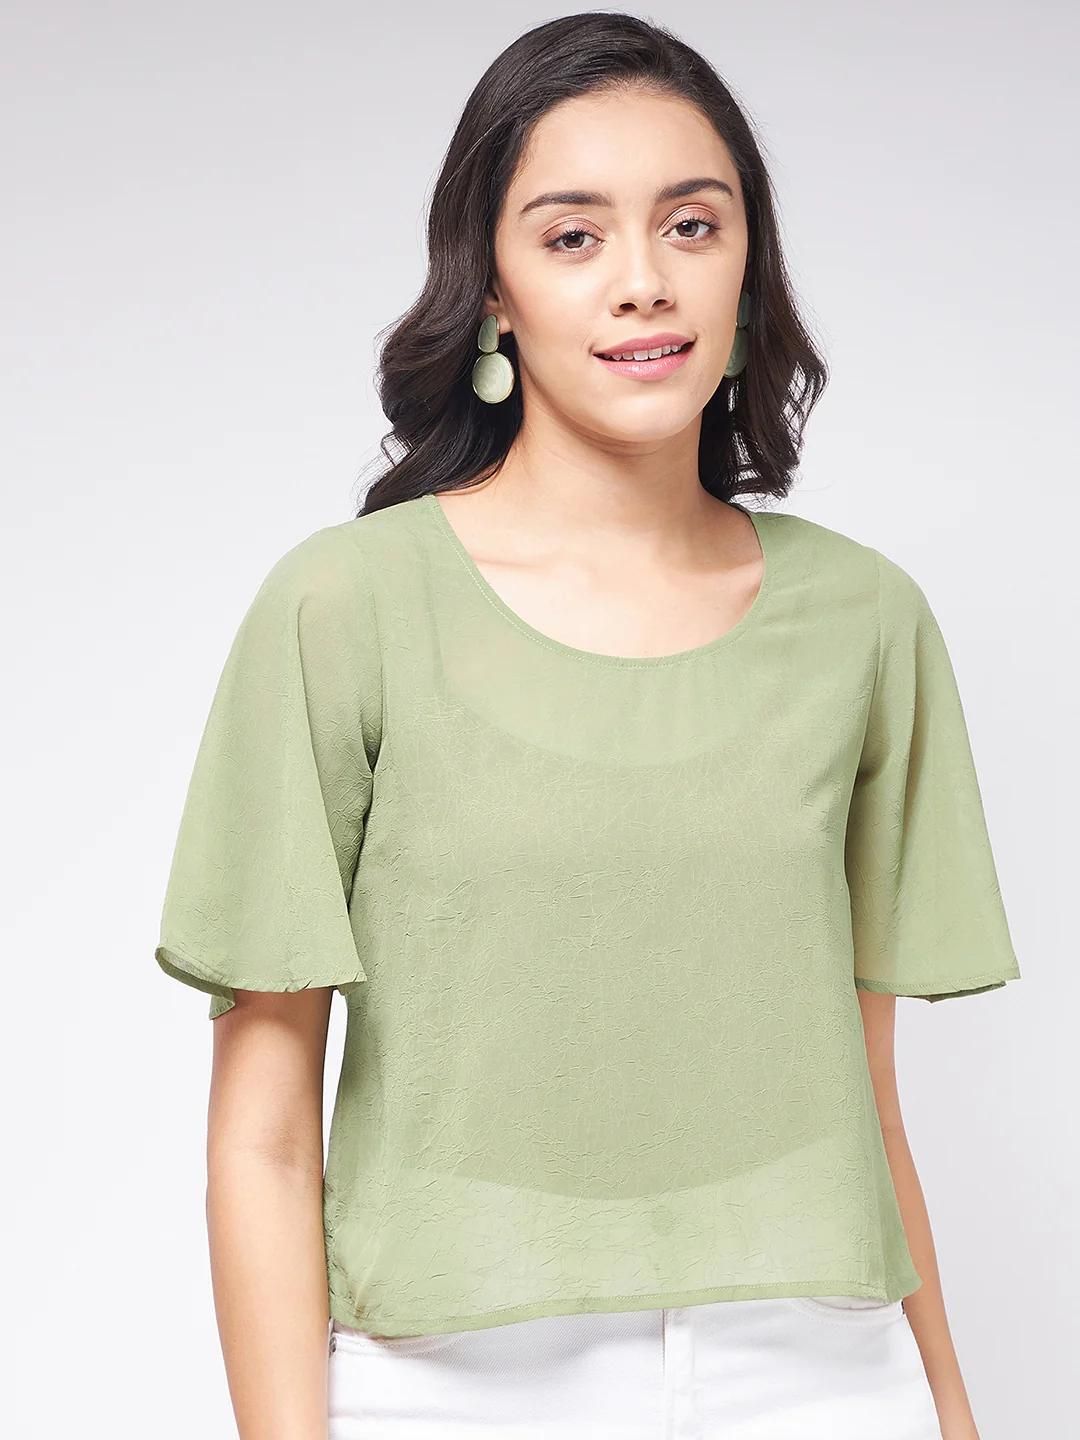 PANNKH Flaunt Yourself In Solid Sheer Green Top